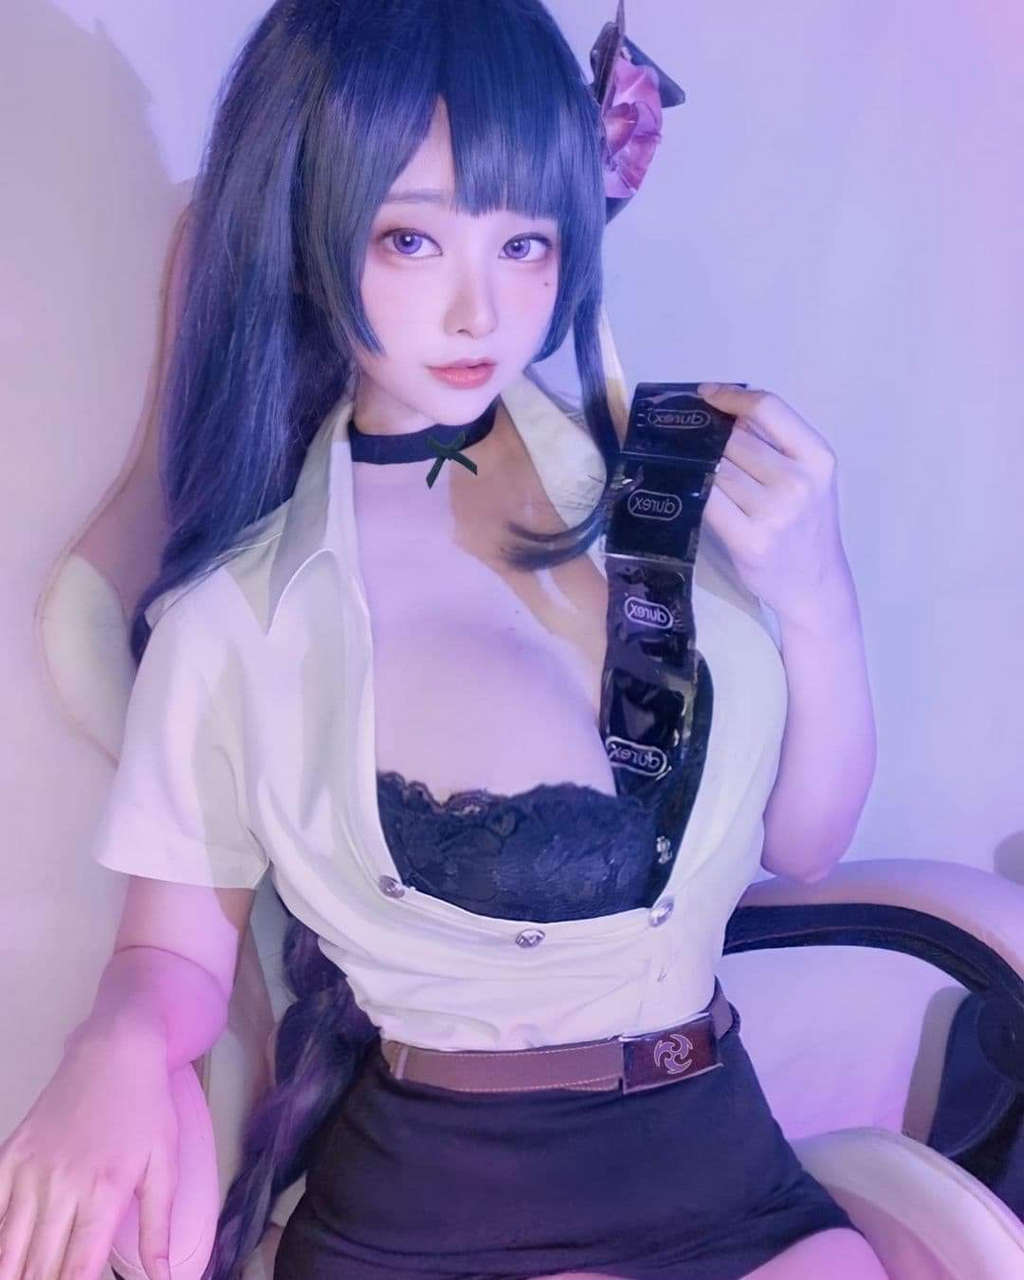 Who Is This Cosplaye